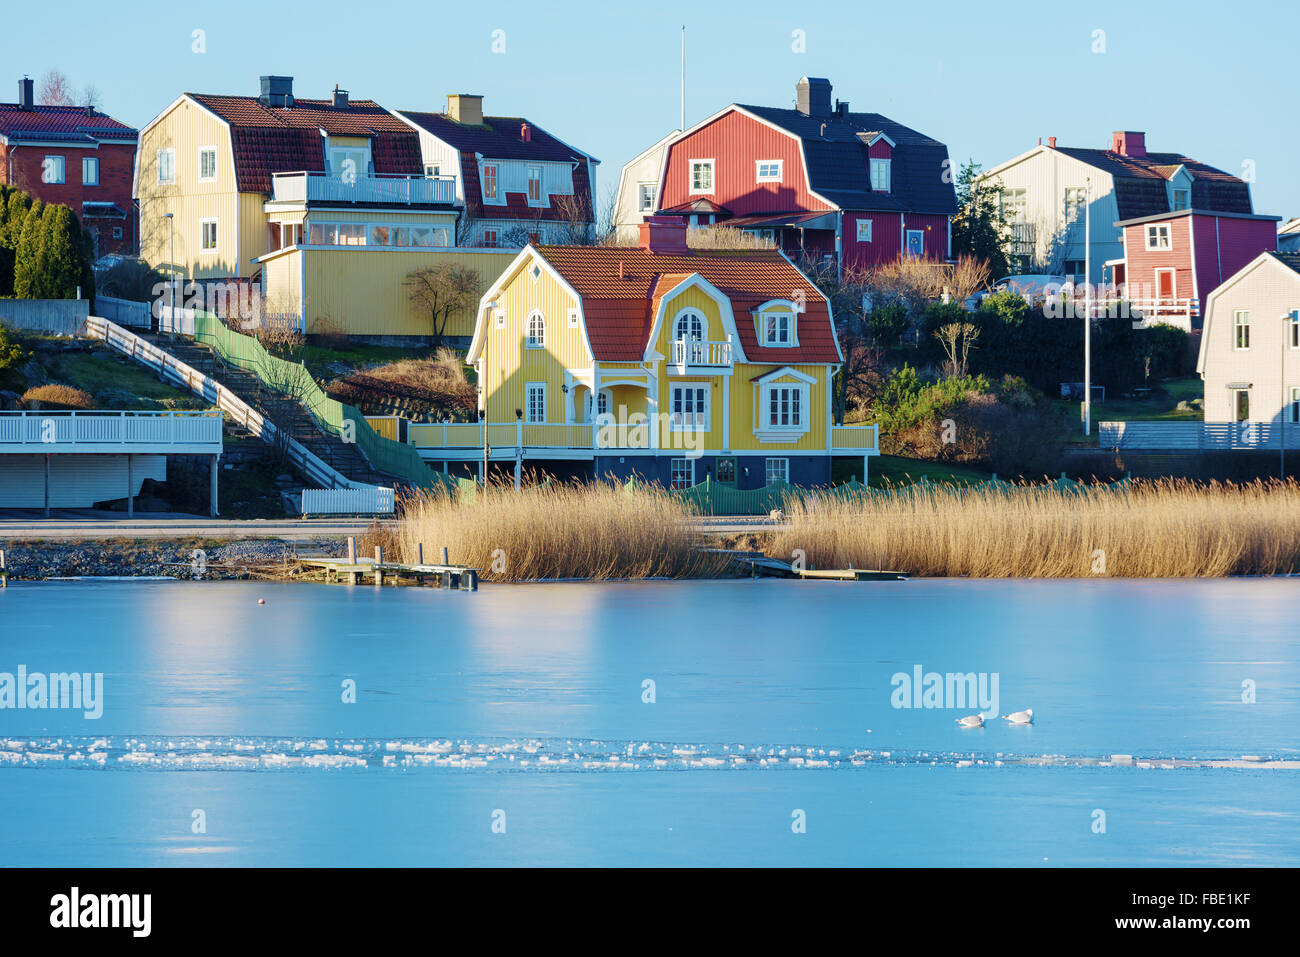 Karlskrona, Sweden - January 13, 2016: Private homes on Lango. Lango is a fine travel location in central Karlskrona. People her Stock Photo